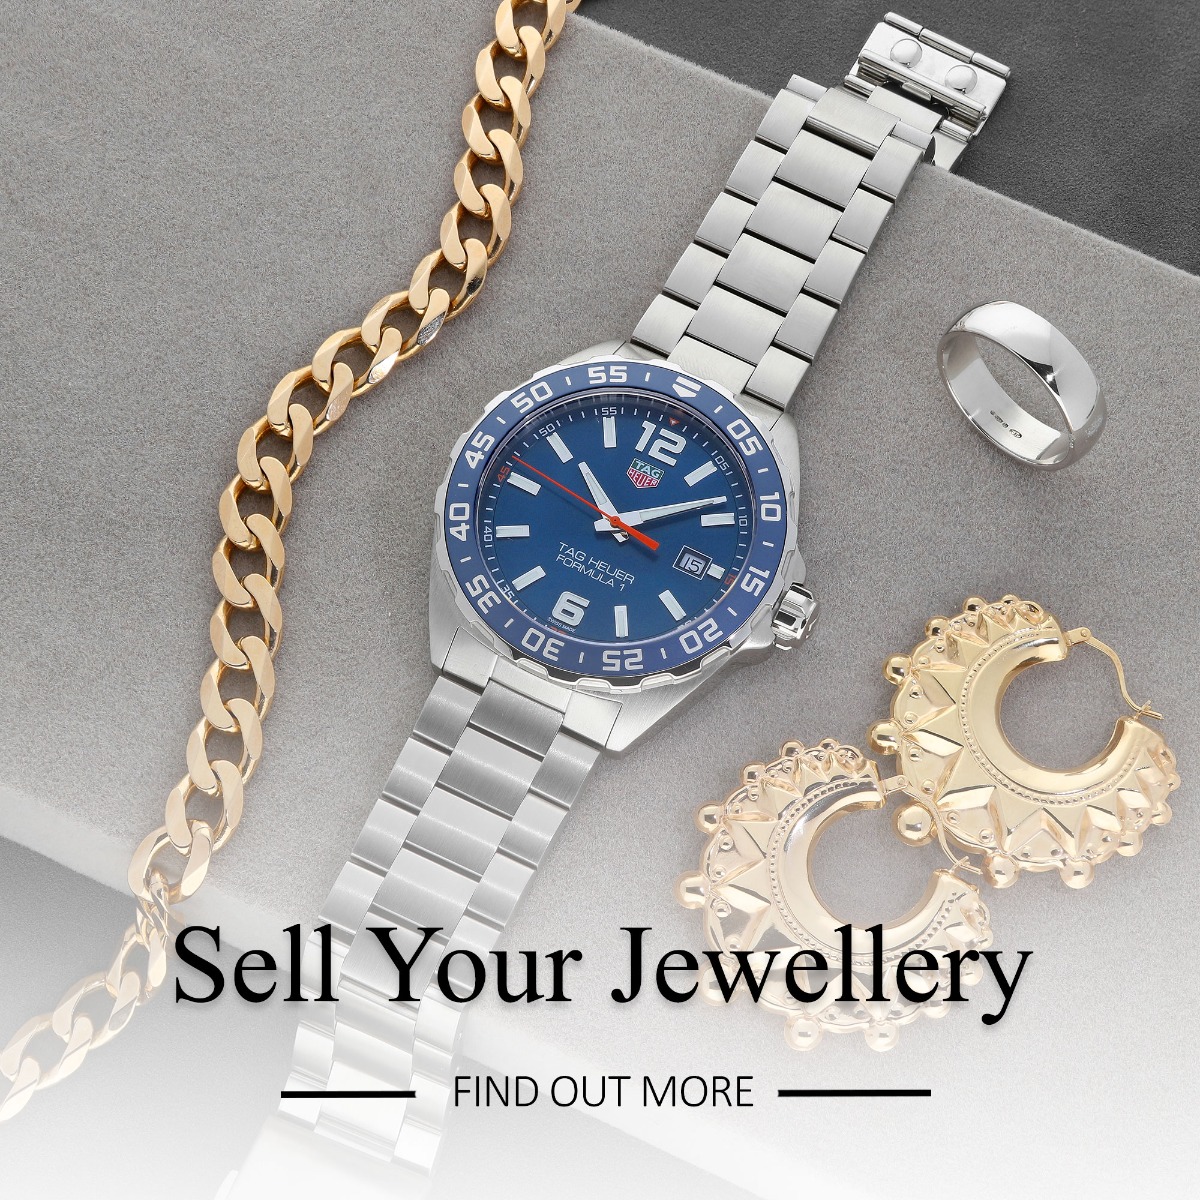 Sell-your-jewellery